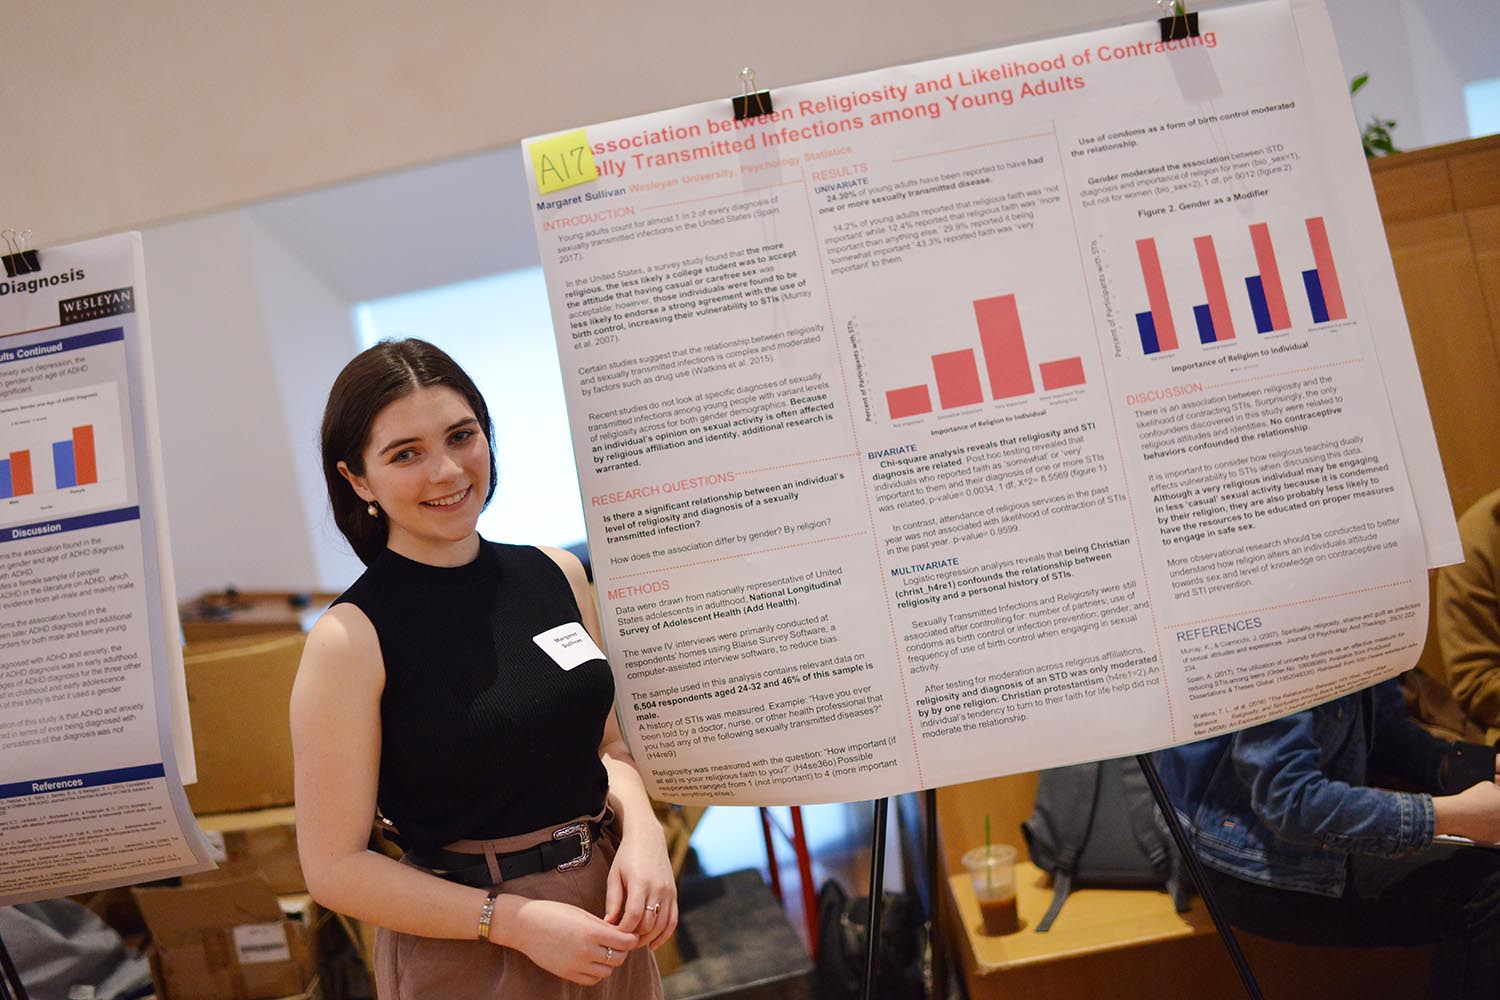 Margaret Sullivan '22 explored the topic of "The Association between Religiosity and Likelihood of Contracting Sexually Transmitted Infections among Young Adults."